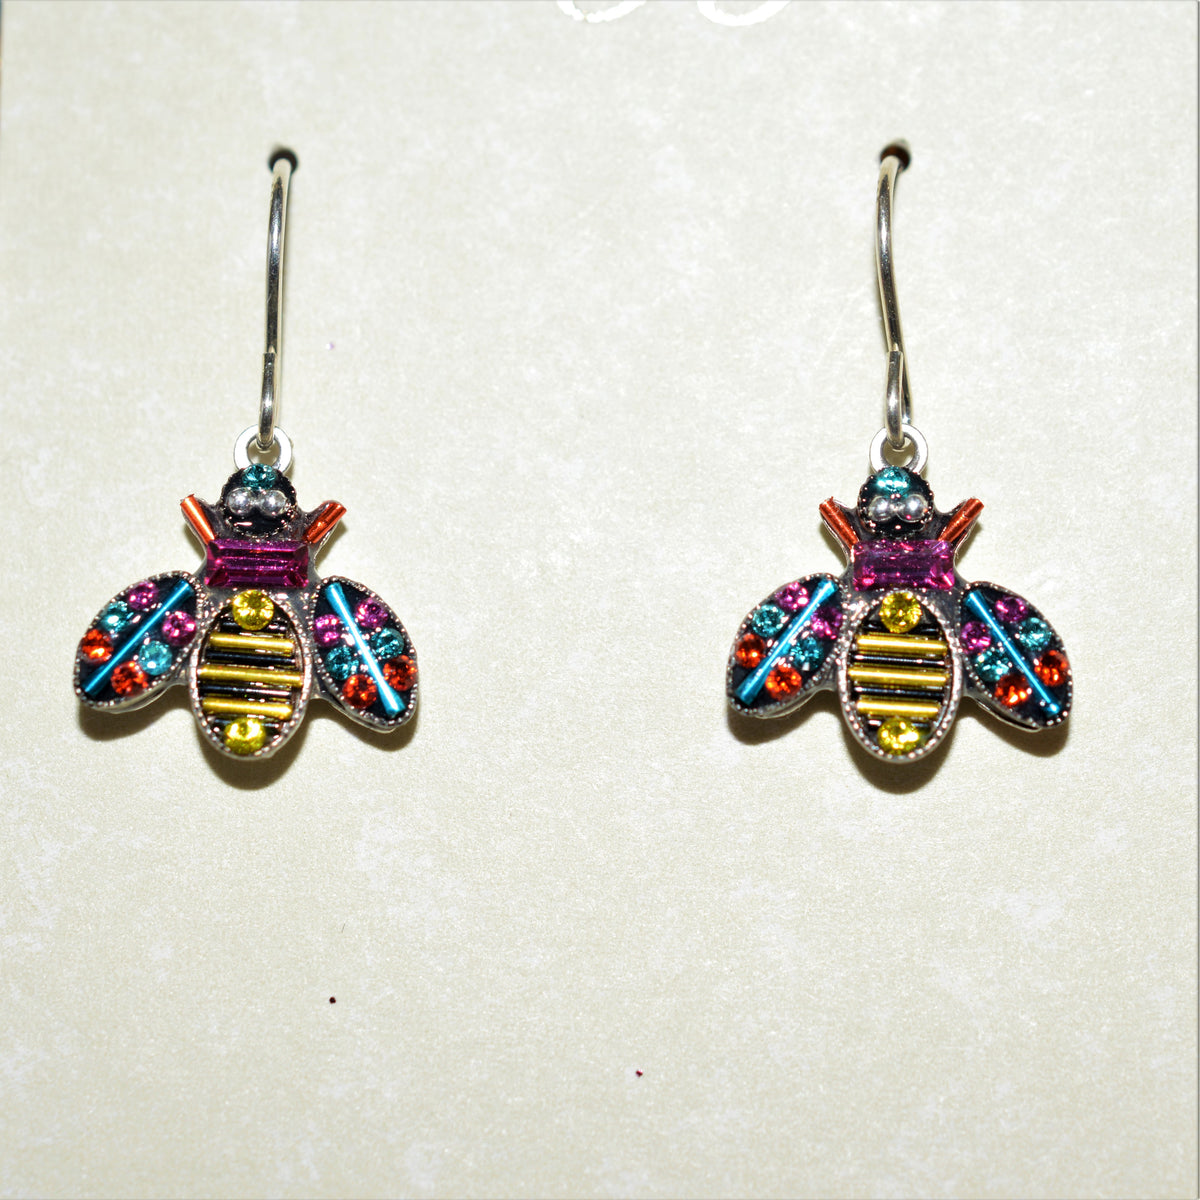 Antique Silver Plated Queen Bee Earrings With Multicolor Crystals by Firefly